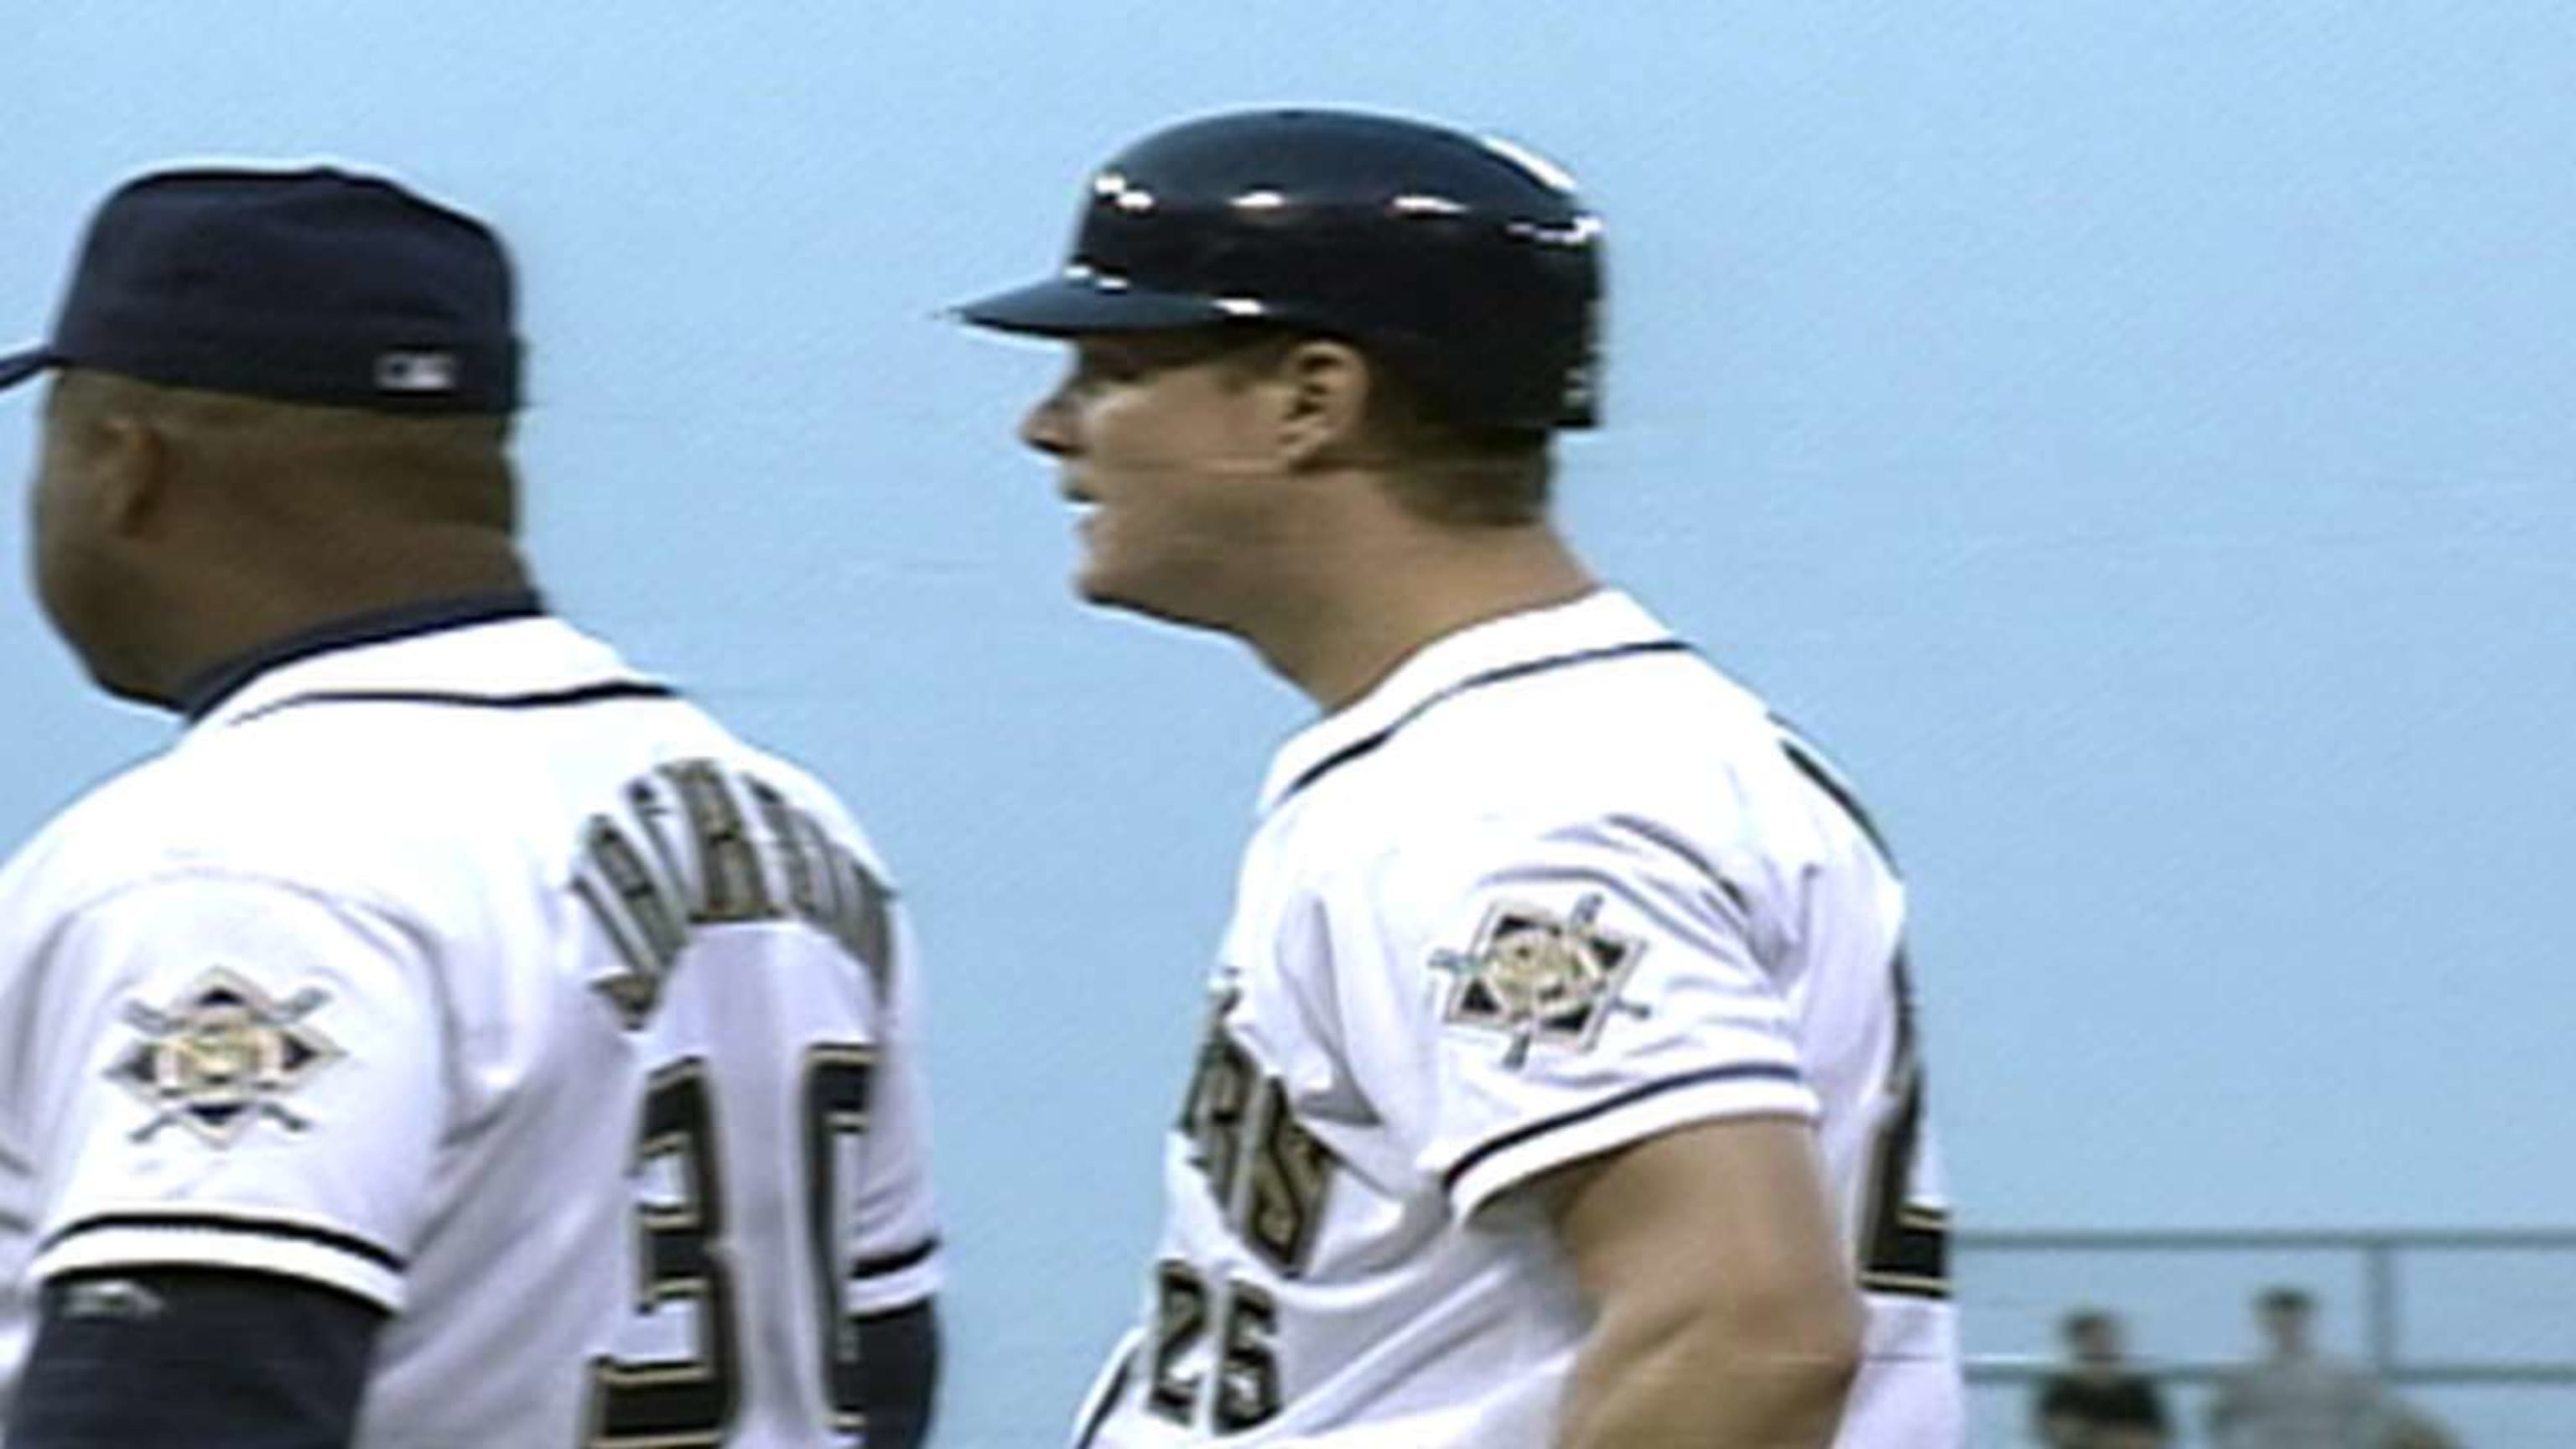 On this day, 18 years ago, Jim Abbott defied the odds and got his first  Major League hit